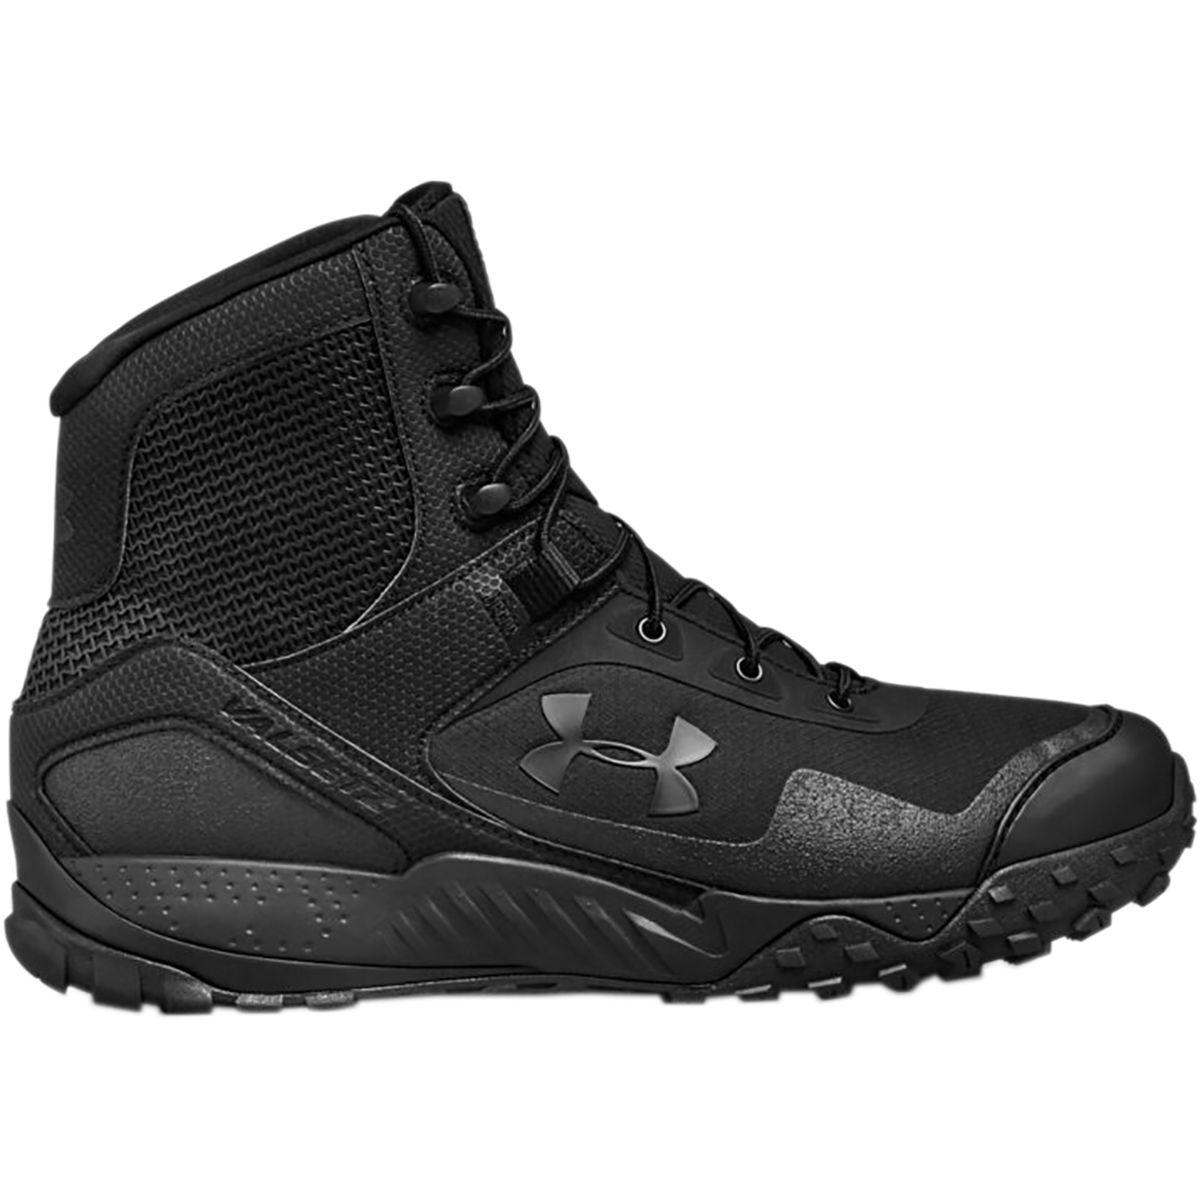 Under Armour Synthetic Valsetz Rts 1.5 Hiking Boot in Black/Black/Black ...